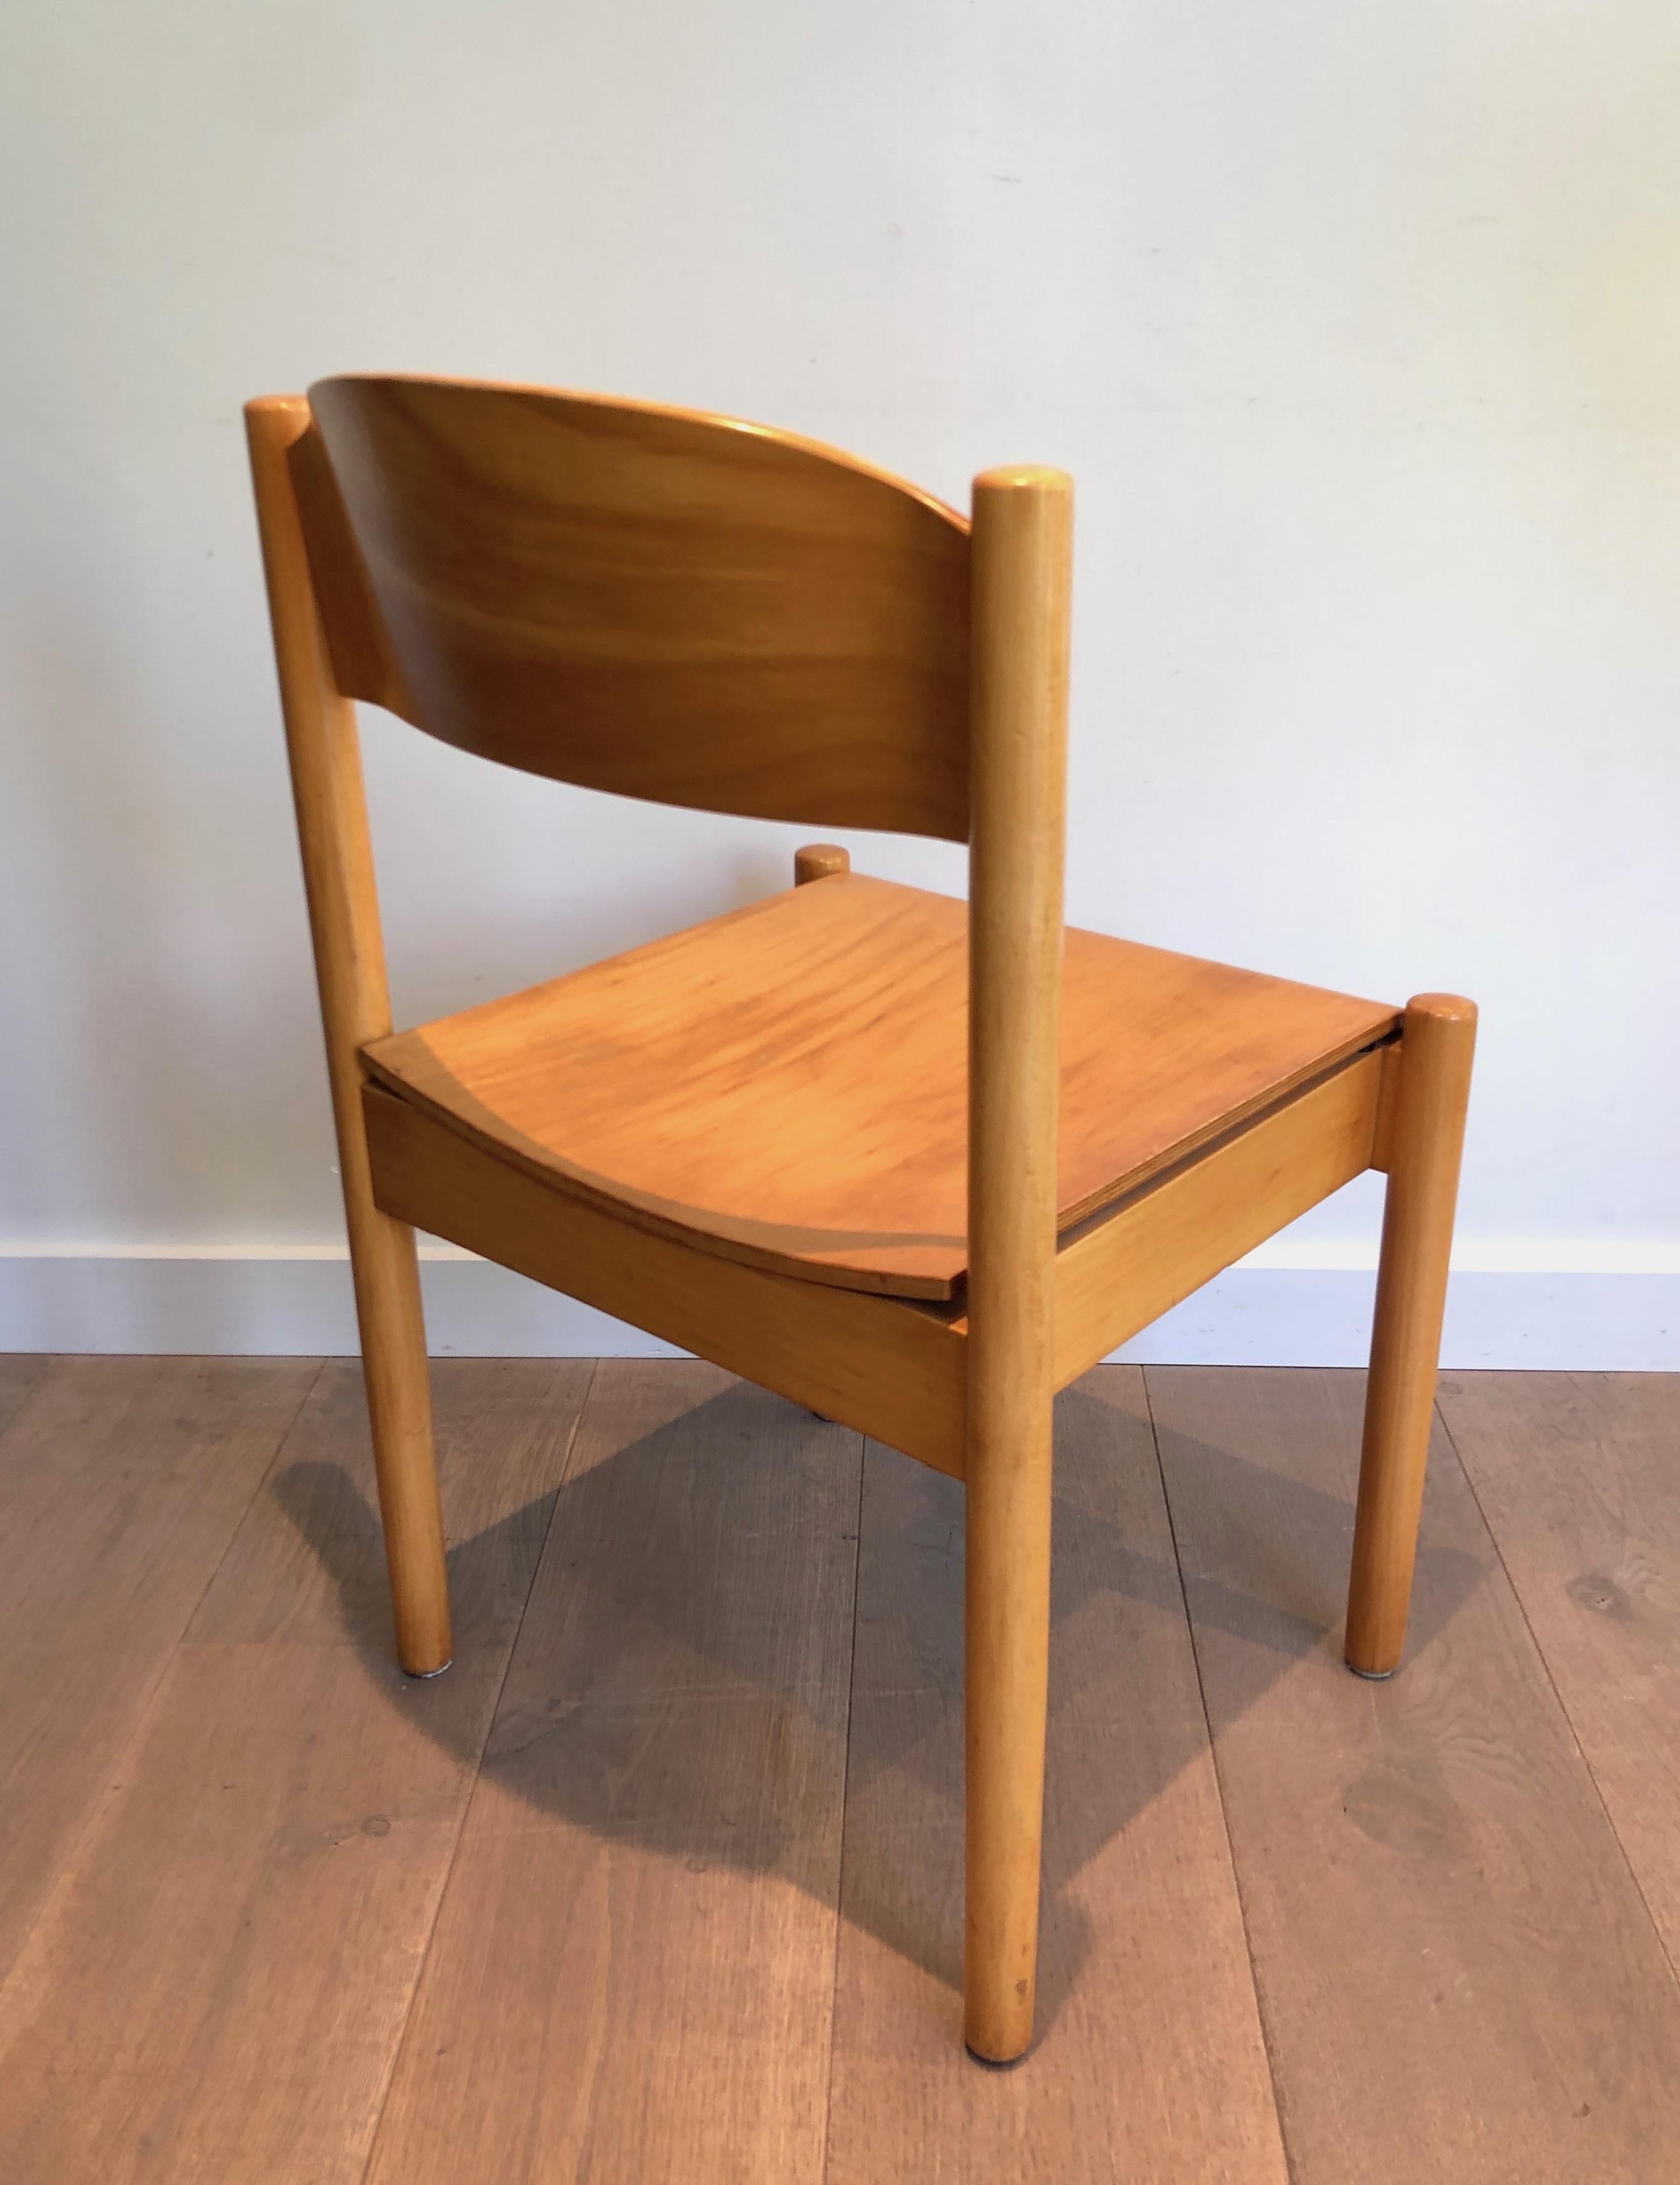 Set of 6 Stackable Pine Chairs, German Work by Karl Klipper, Circa 1970 For Sale 3